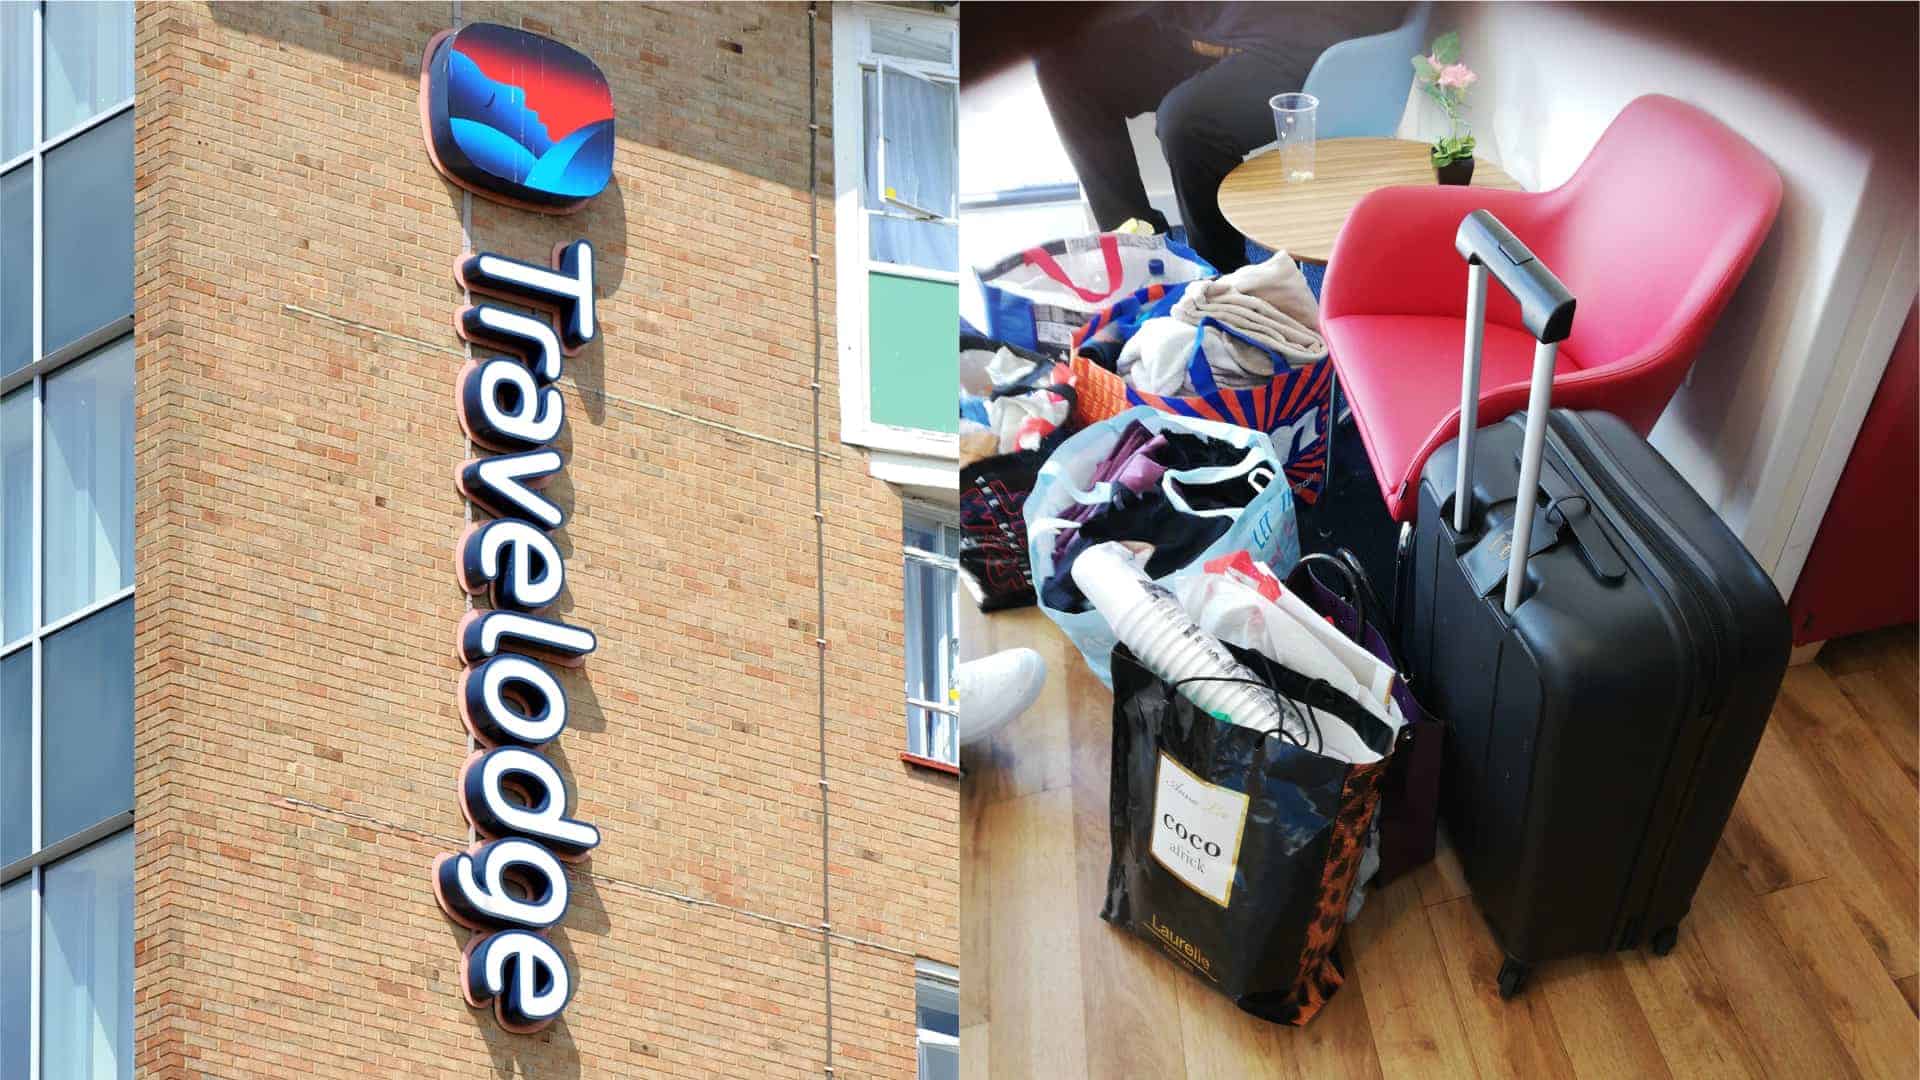 Travelodge criticised after homeless and vulnerable asked to leave